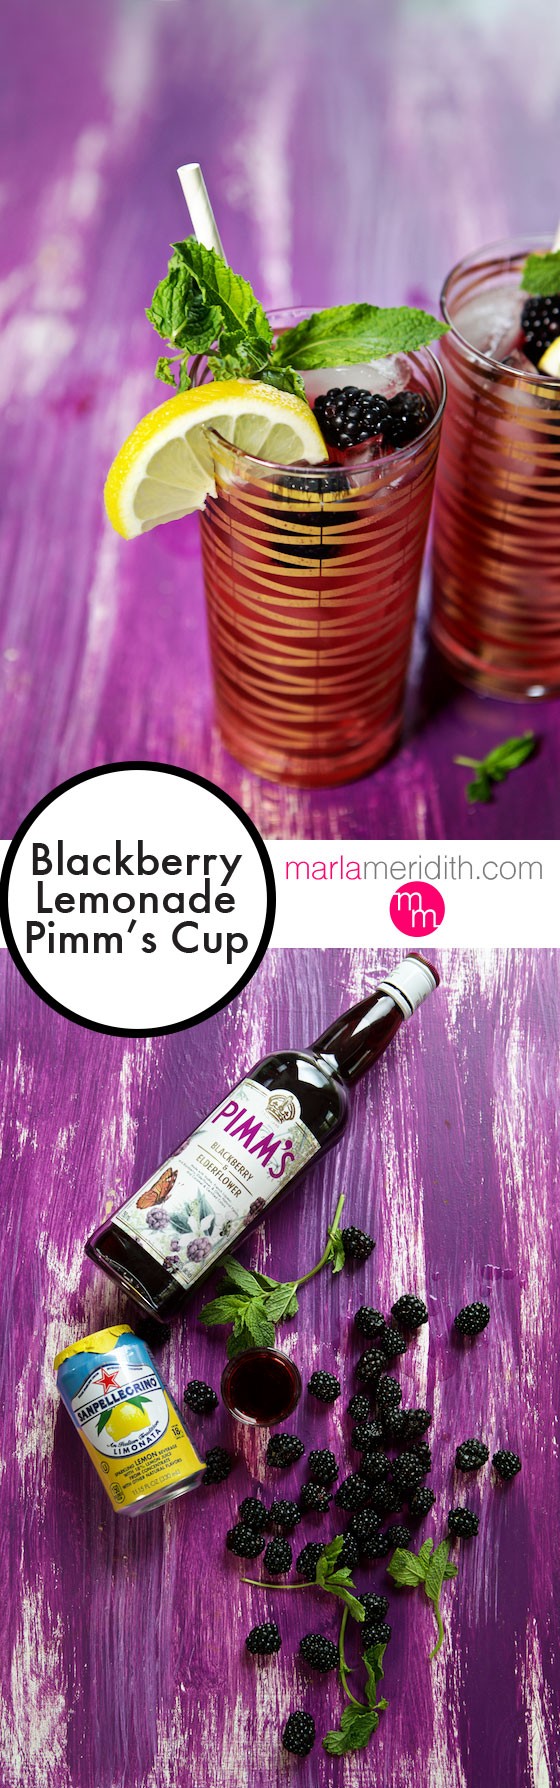 Blackberry Lemonade Pimm's Cup | A refreshing fruity cocktail! MarlaMeridith.com ( @marlameridith )